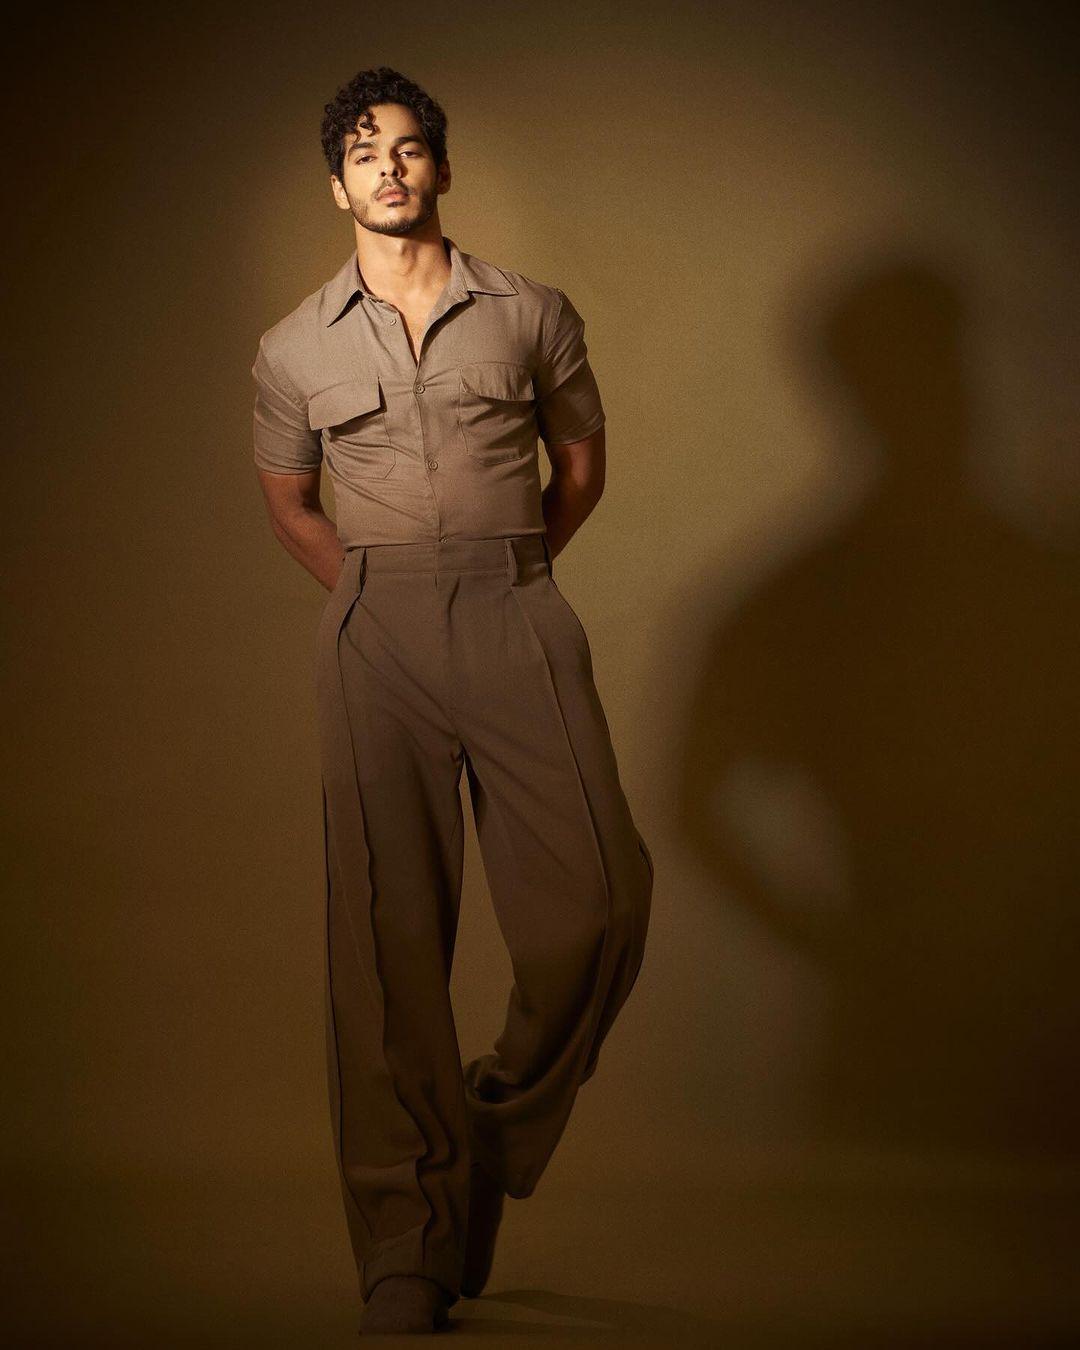 Ishaan Khatter opted for a classic yet stylish look with his beige shirt and trousers.